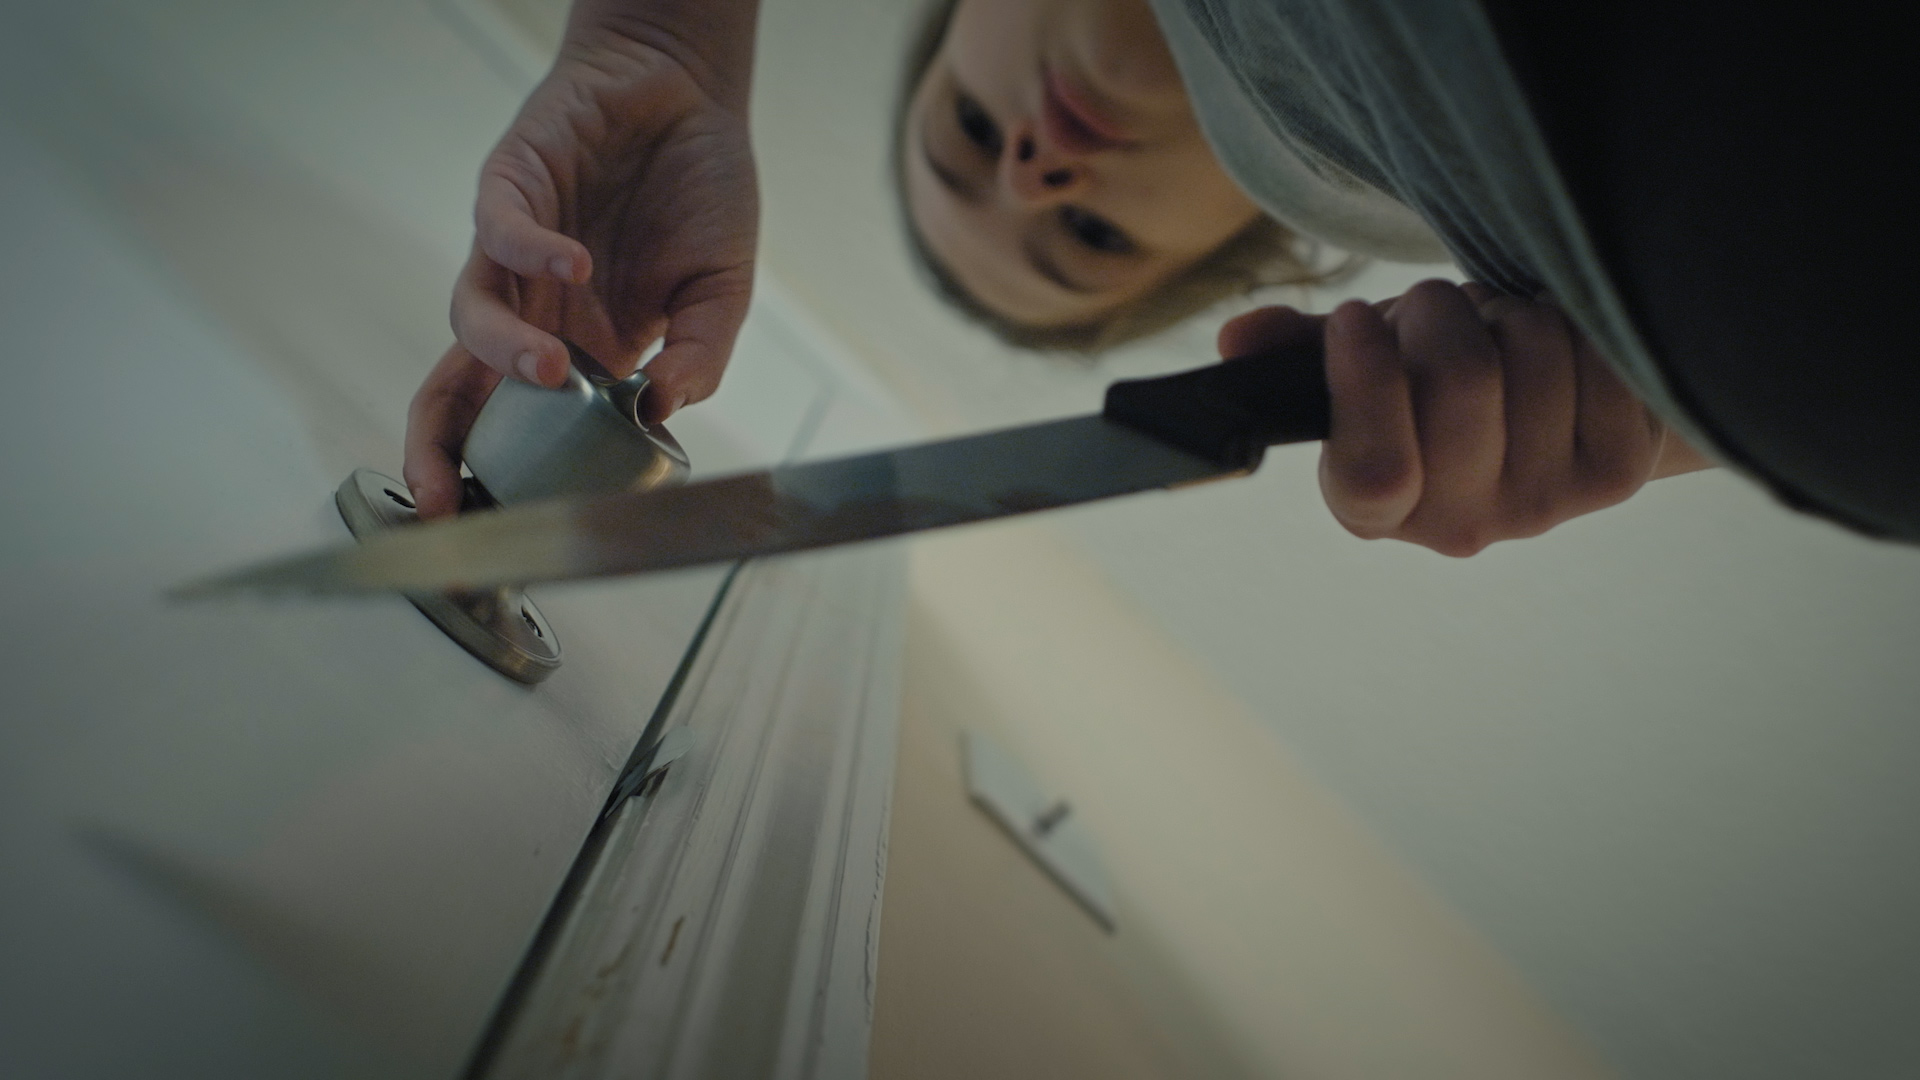 Clara approaches a door with a knife in hand